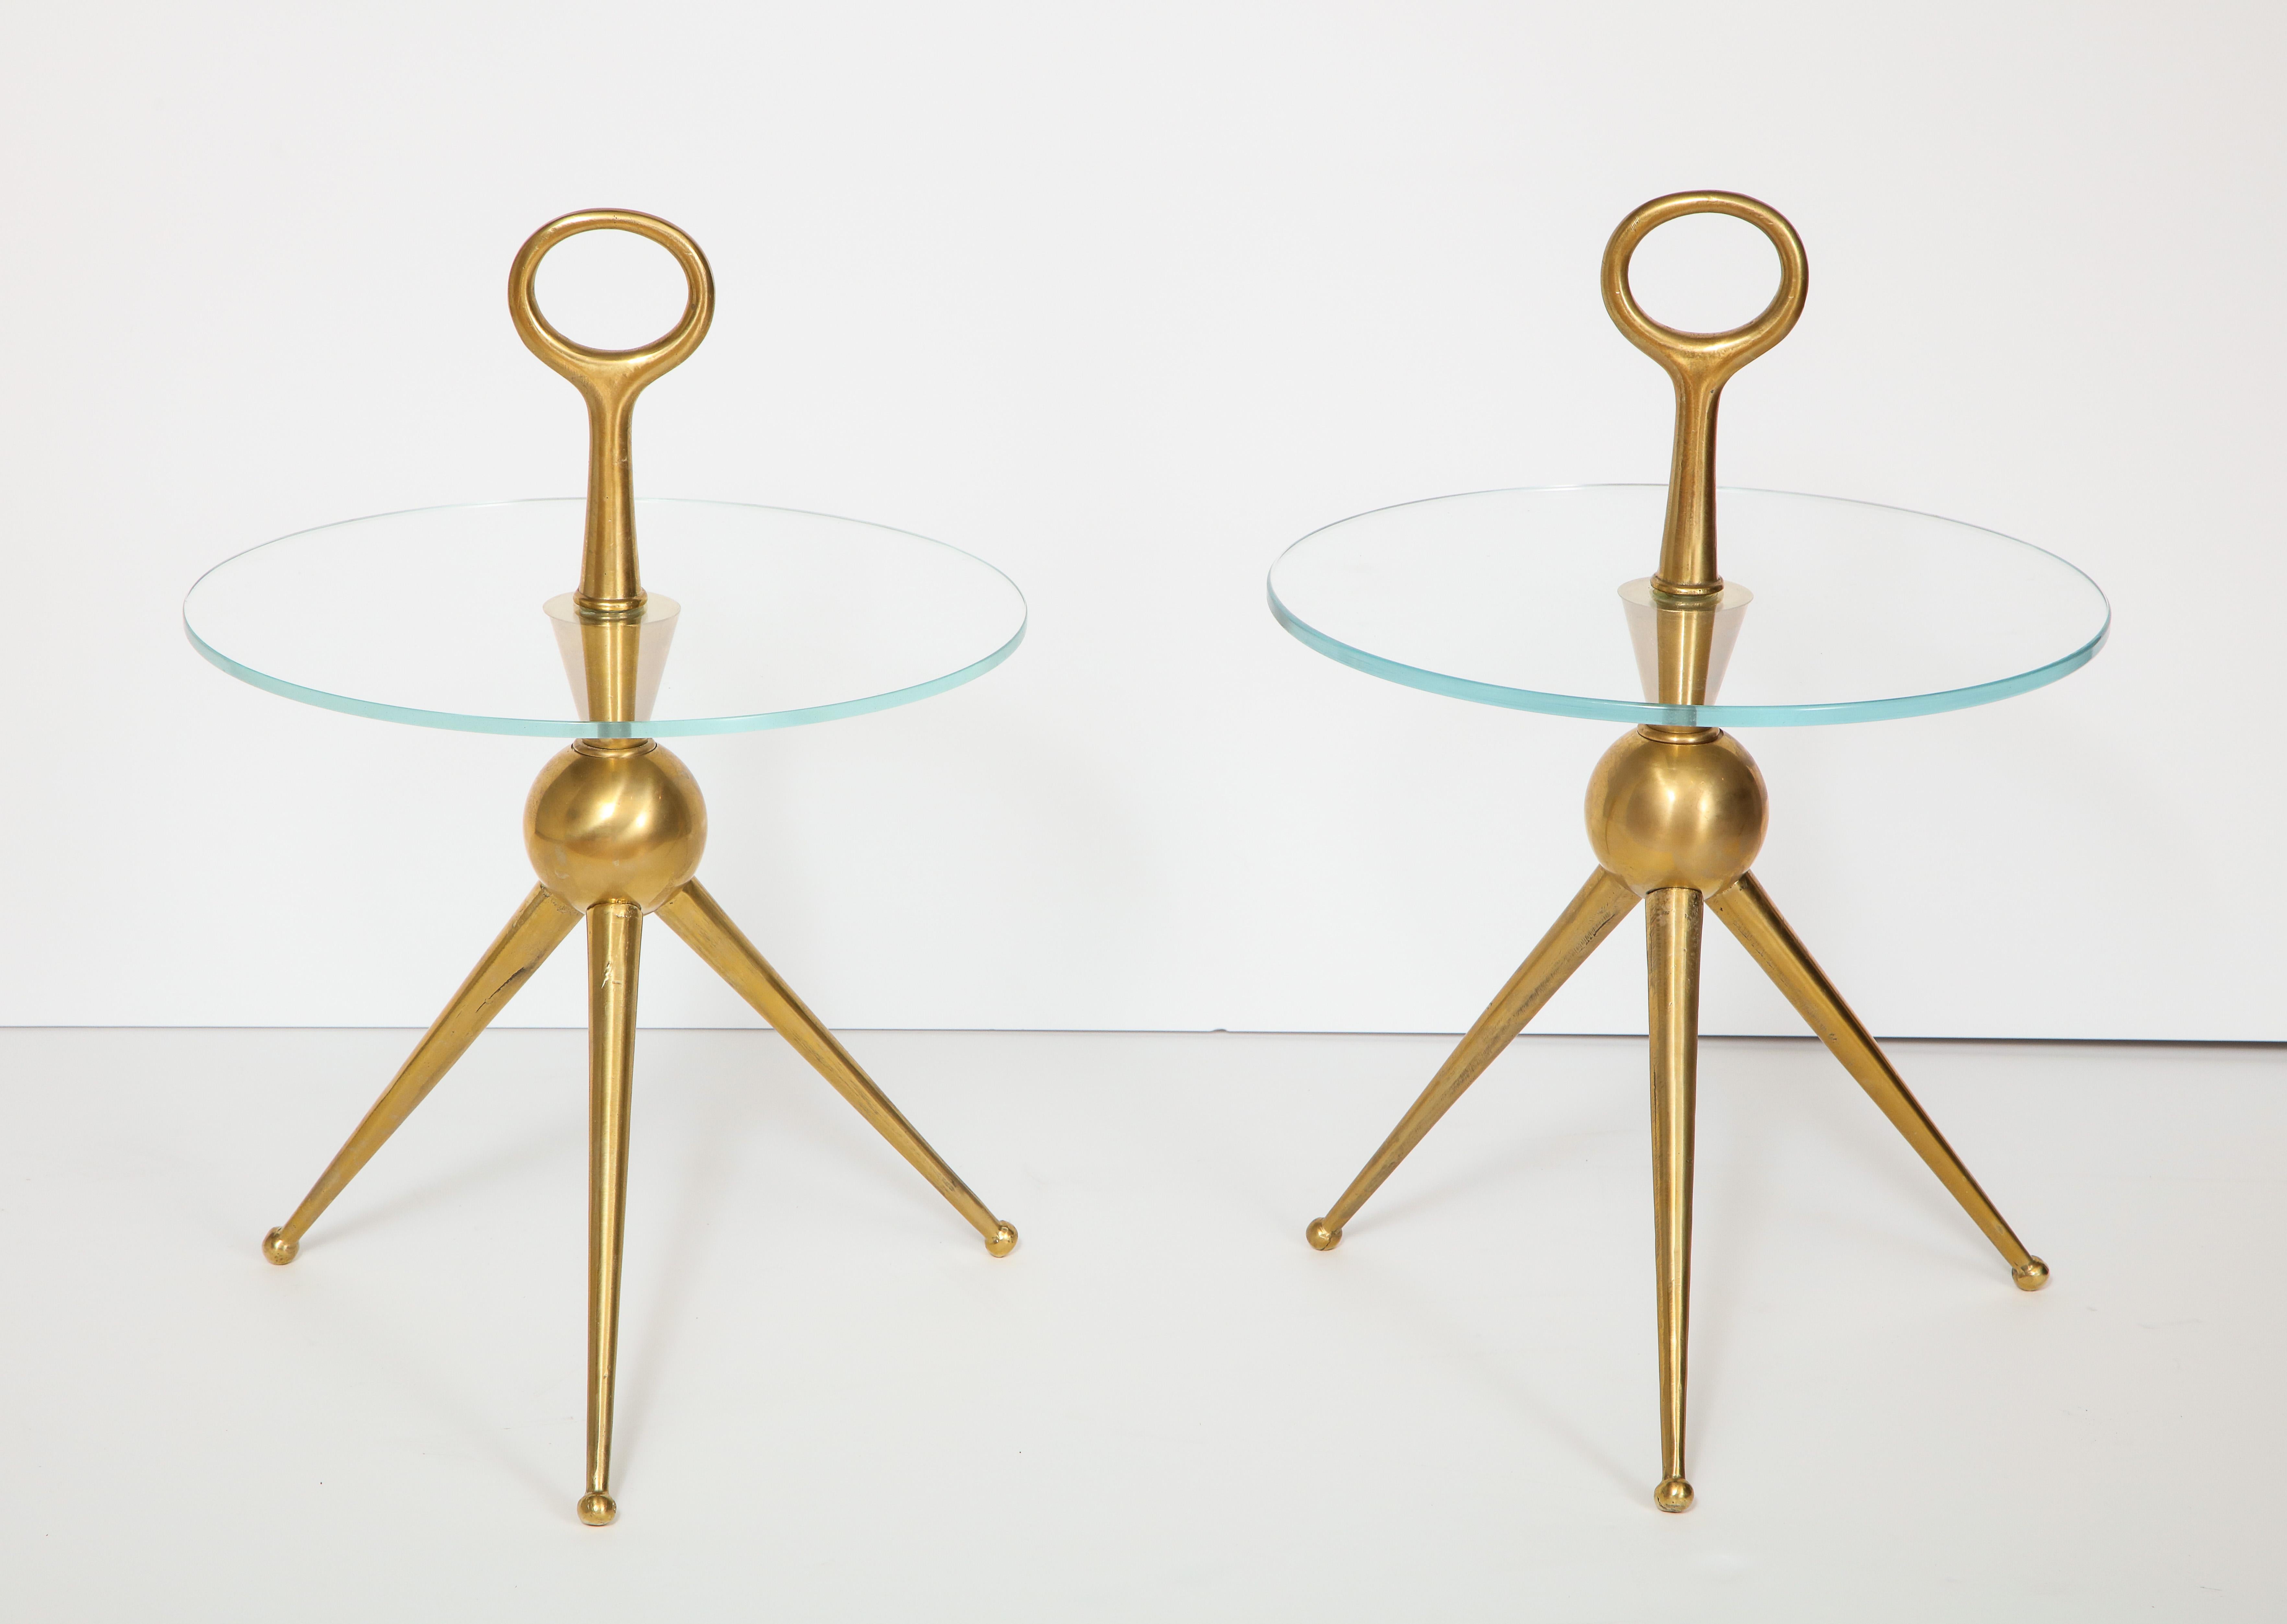 Pair of chic Italian martini side tables with clear round glass tops. Tripod base and with eyehook handle. Handcrafted in Florence of solid bronze. A work of art. Overall height of table, including handle is 23